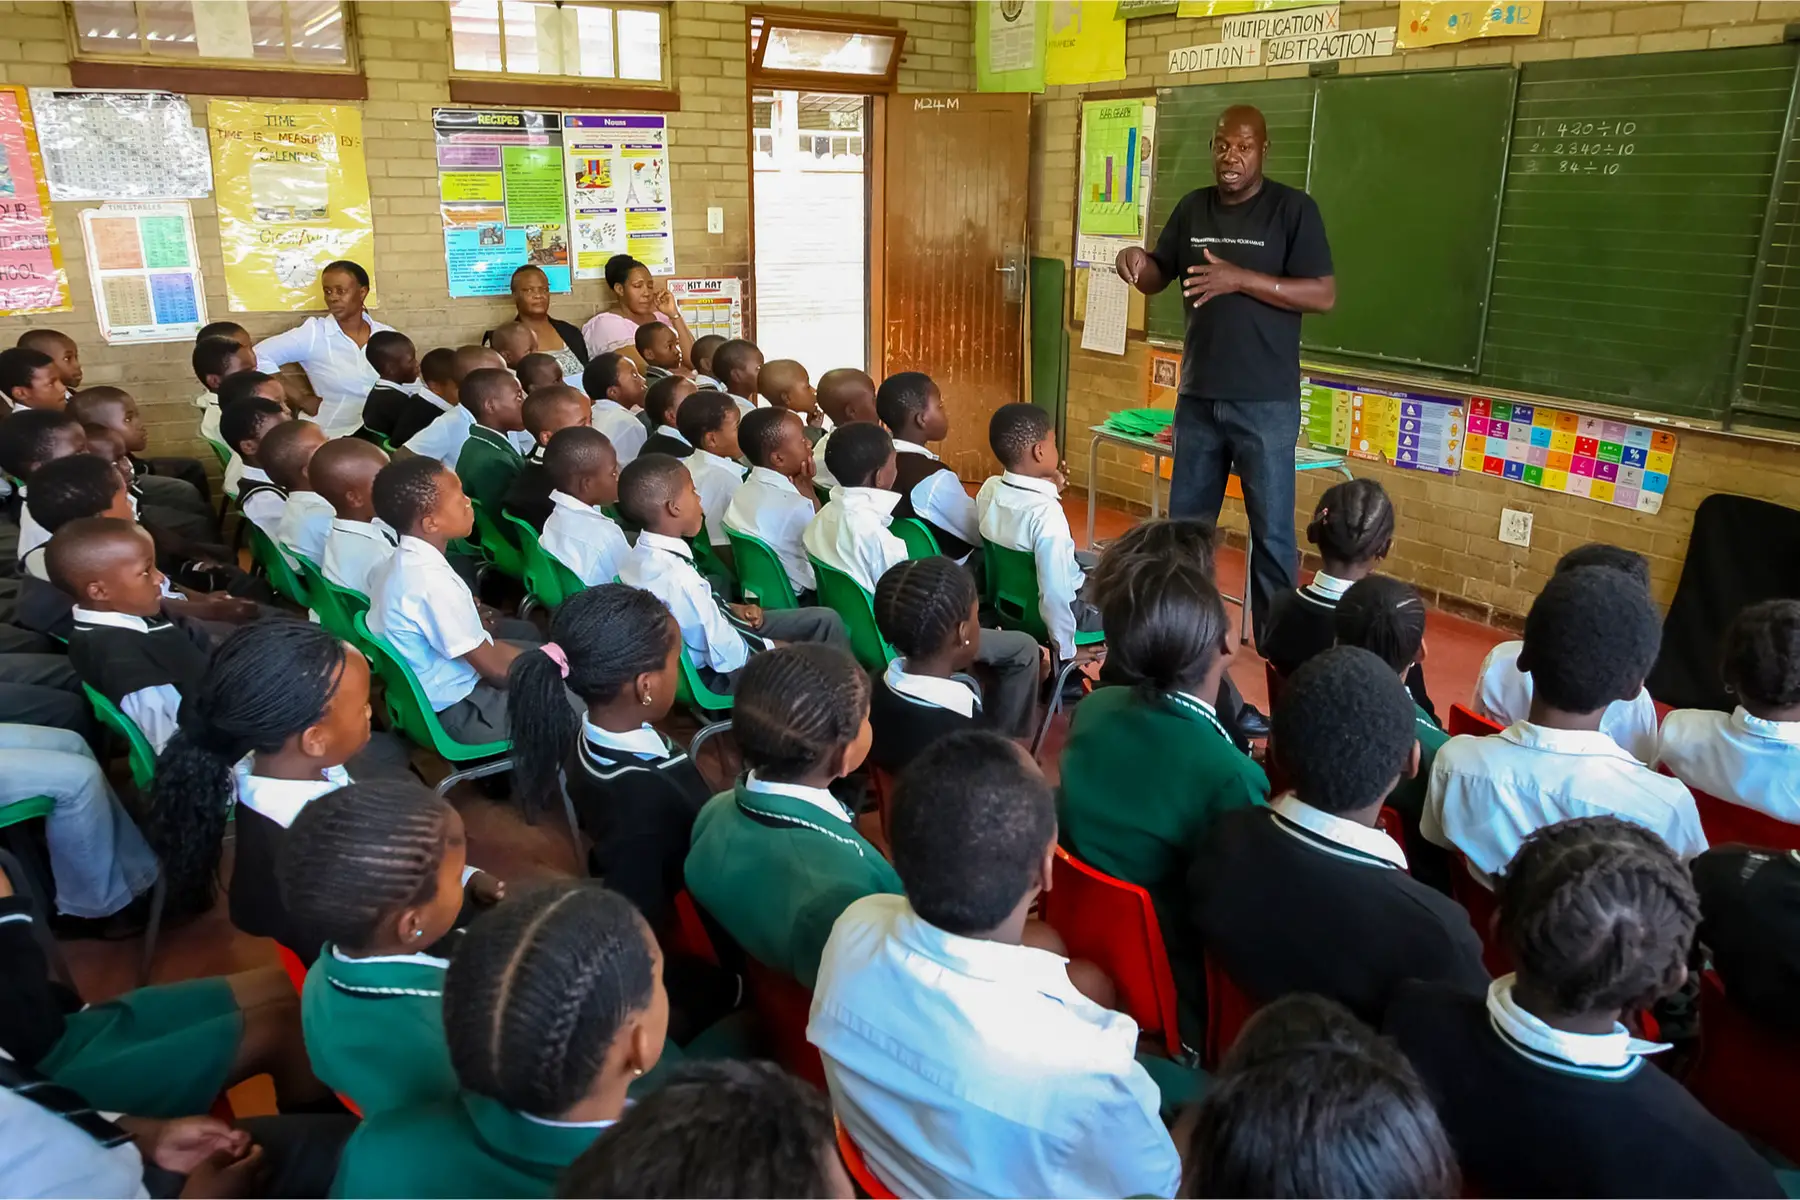 right to education: a teacher addresses pupils at a school in Johannesburg, South Africa